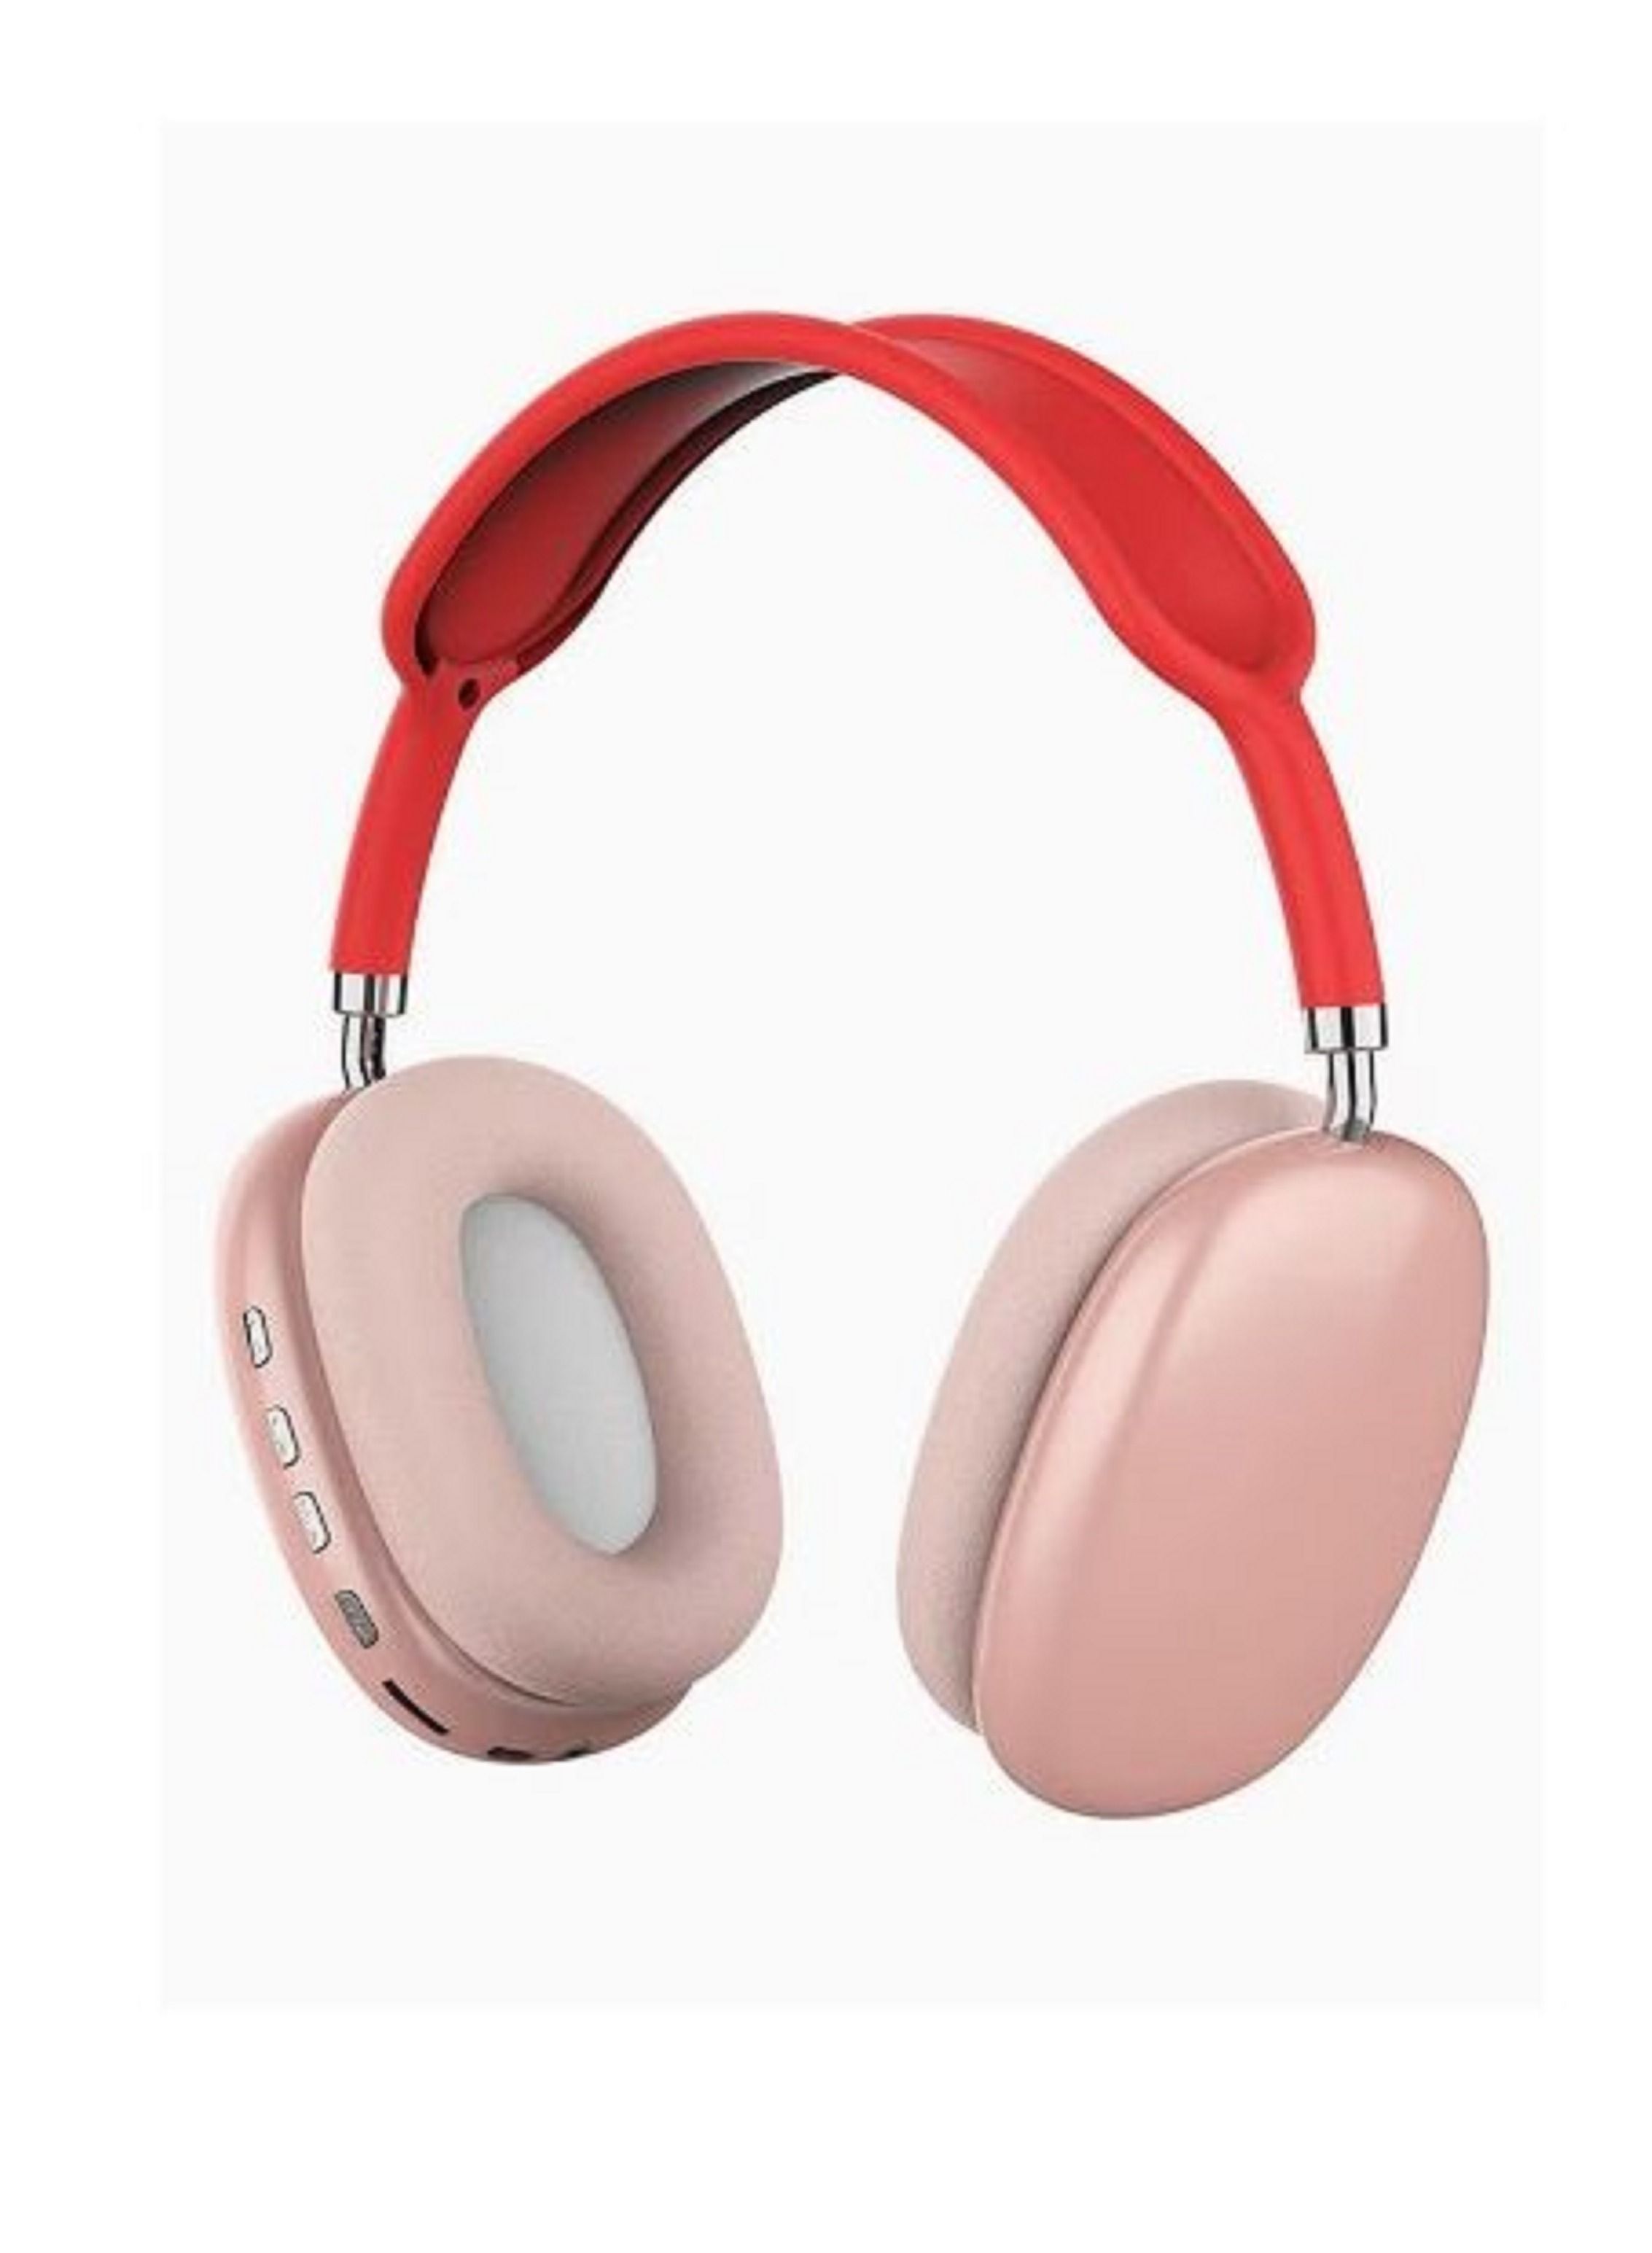 Bluetooth Wireless Over-Ear Headphone With Mic, Rose - P9